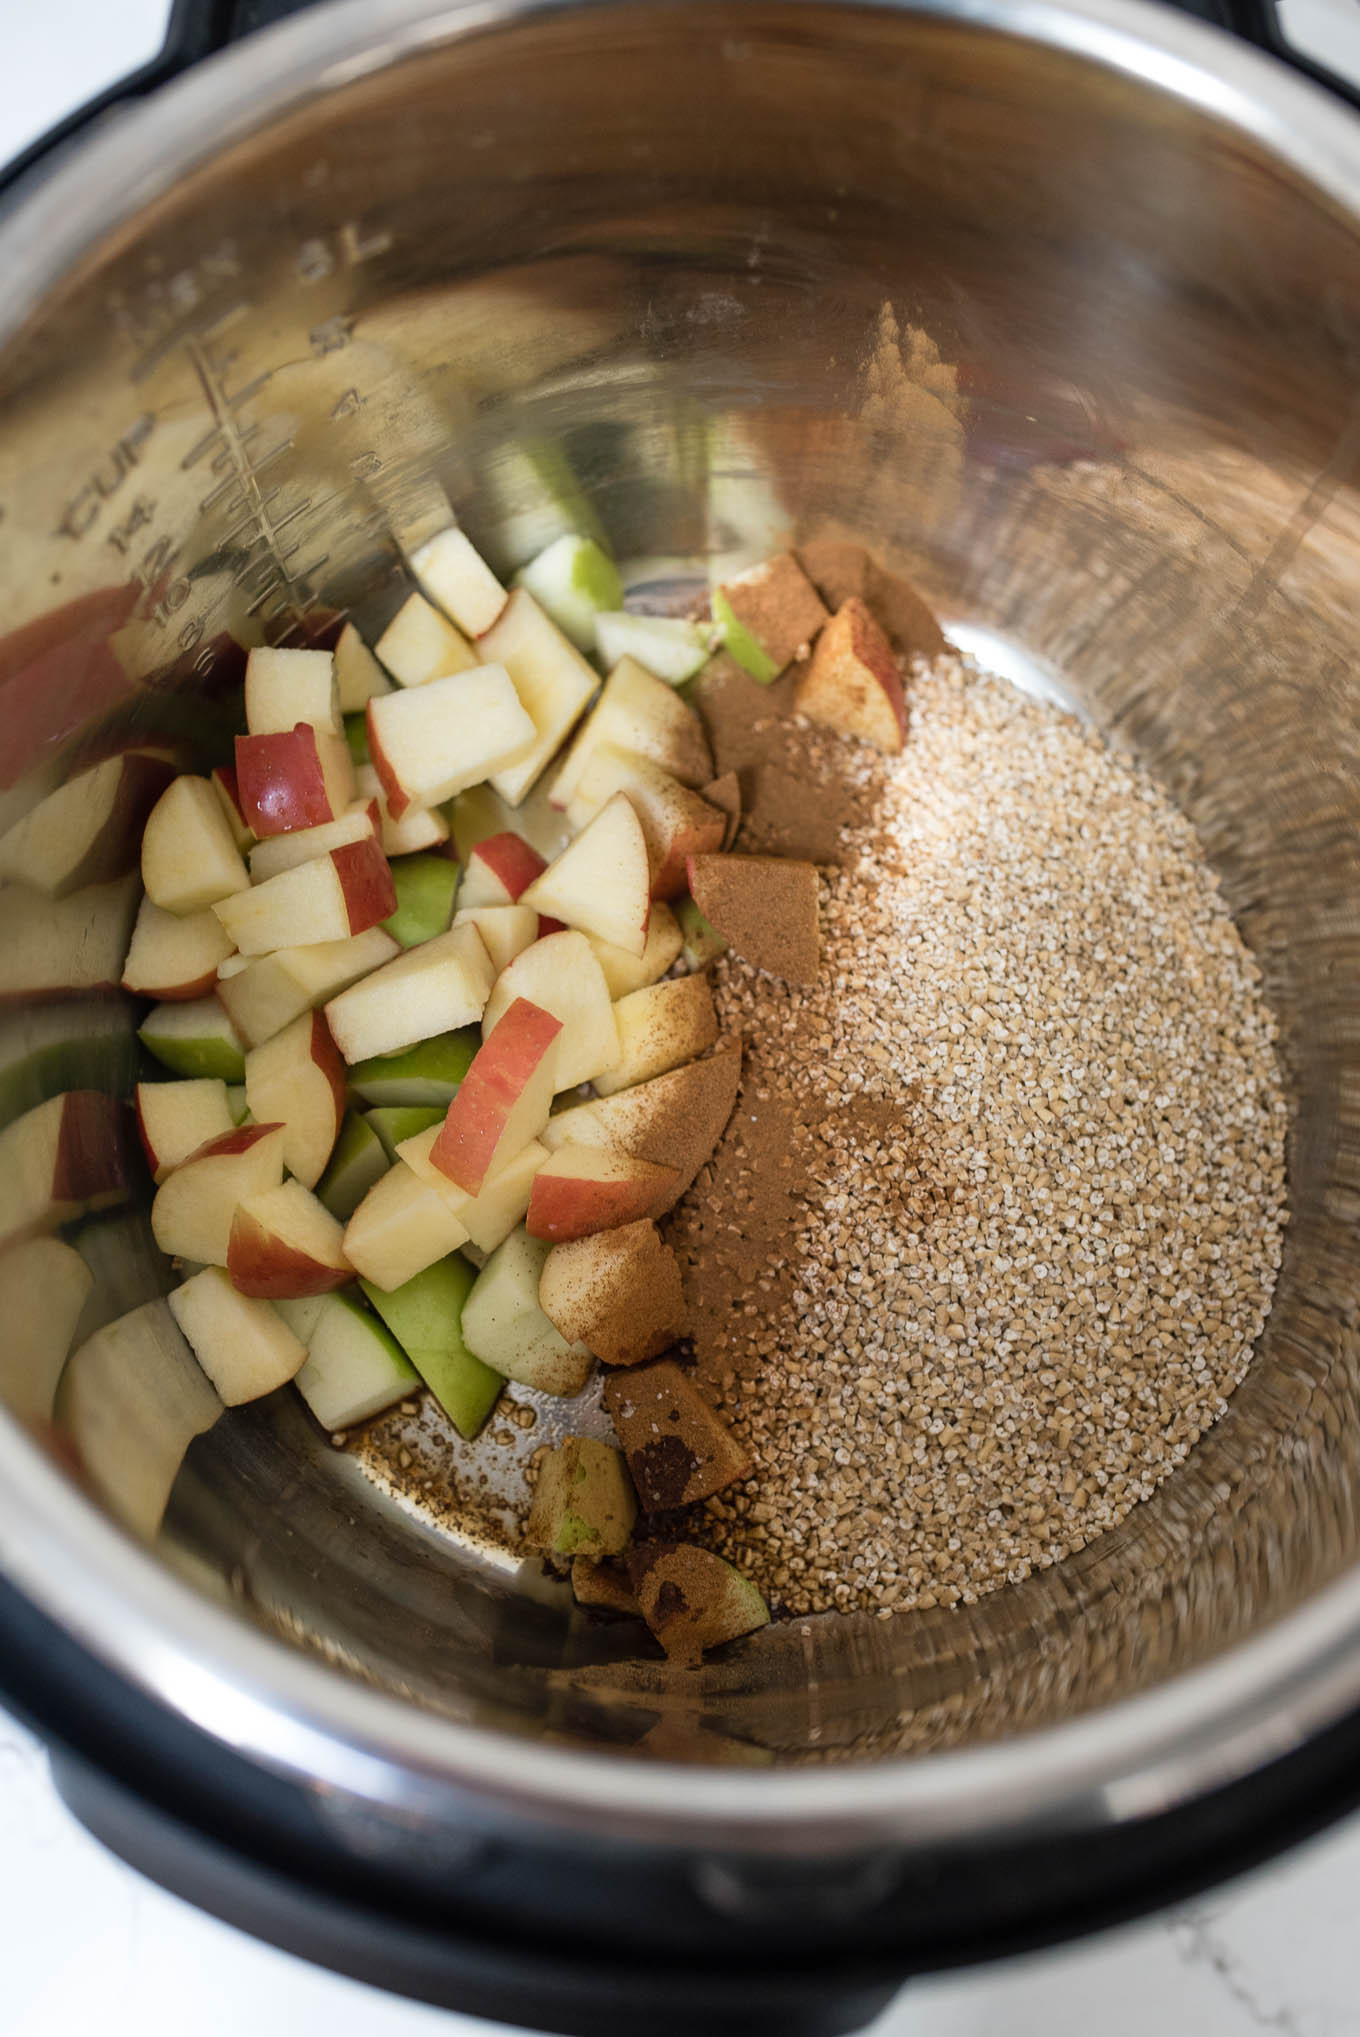 Apples, cinnamon and steel cut oats in the Instant Pot